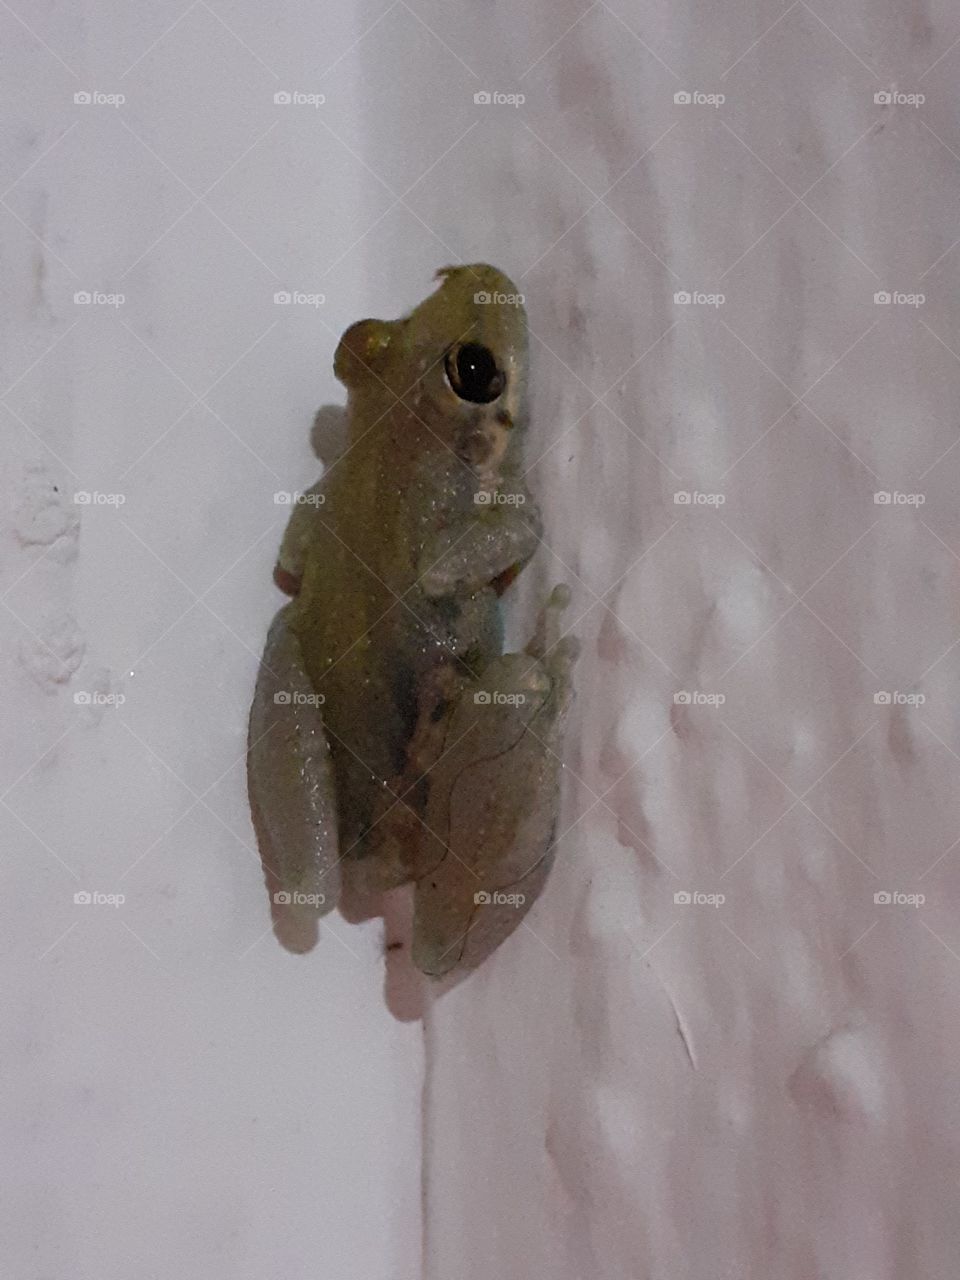 A frog on the wall